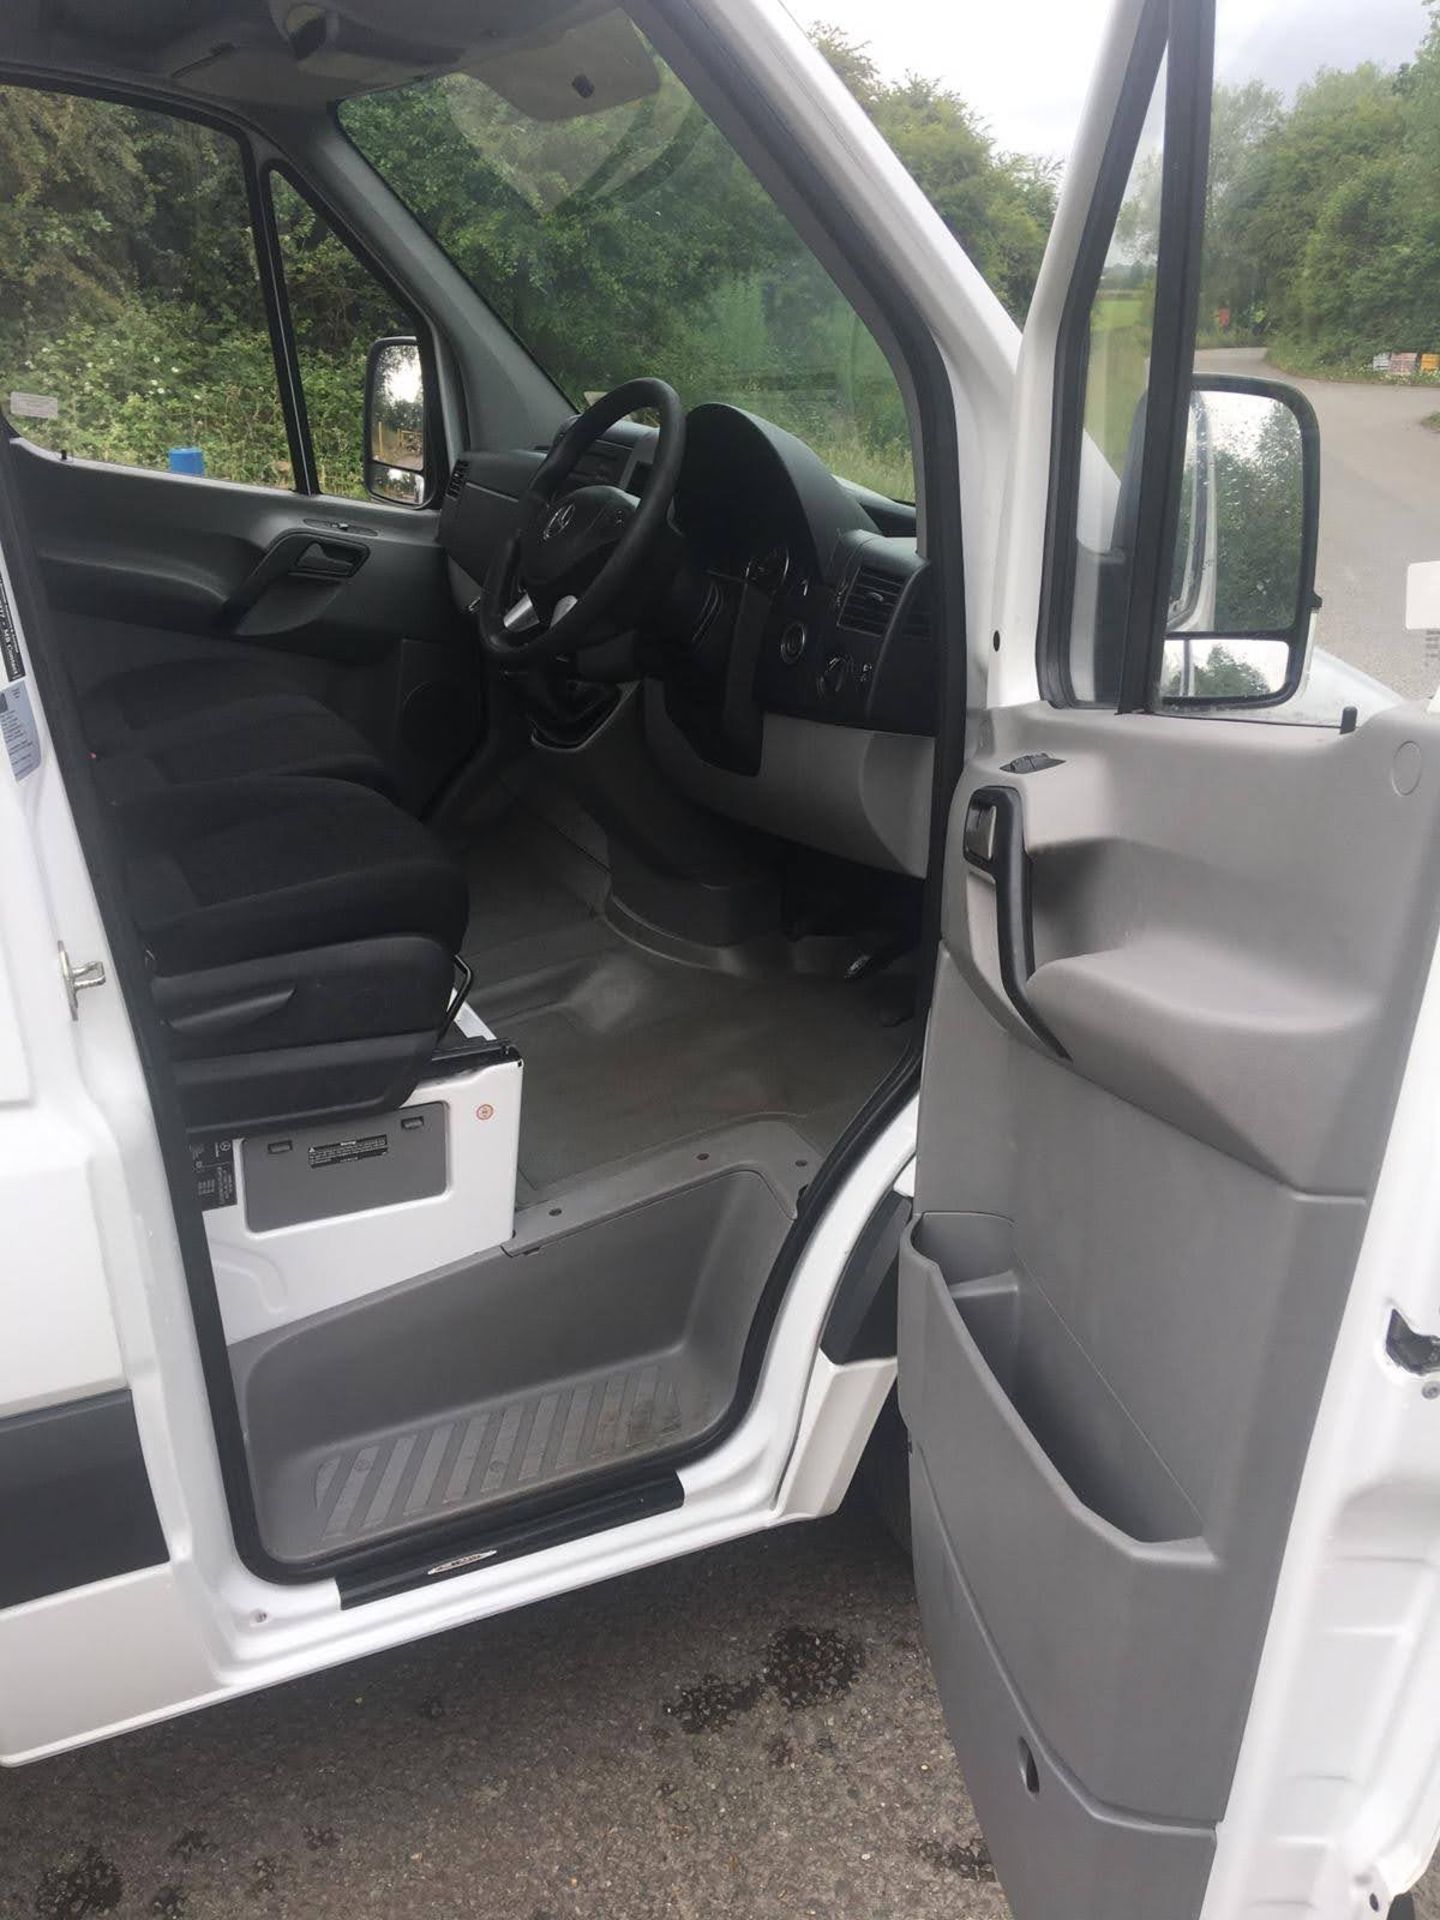 VERY RARE! 2013/13 REG MERCEDES-BENZ SPRINTER 519 CDI 3.0 DIESEL WHITE RECOVERY, (BMW NOT INCLUDED) - Image 15 of 24